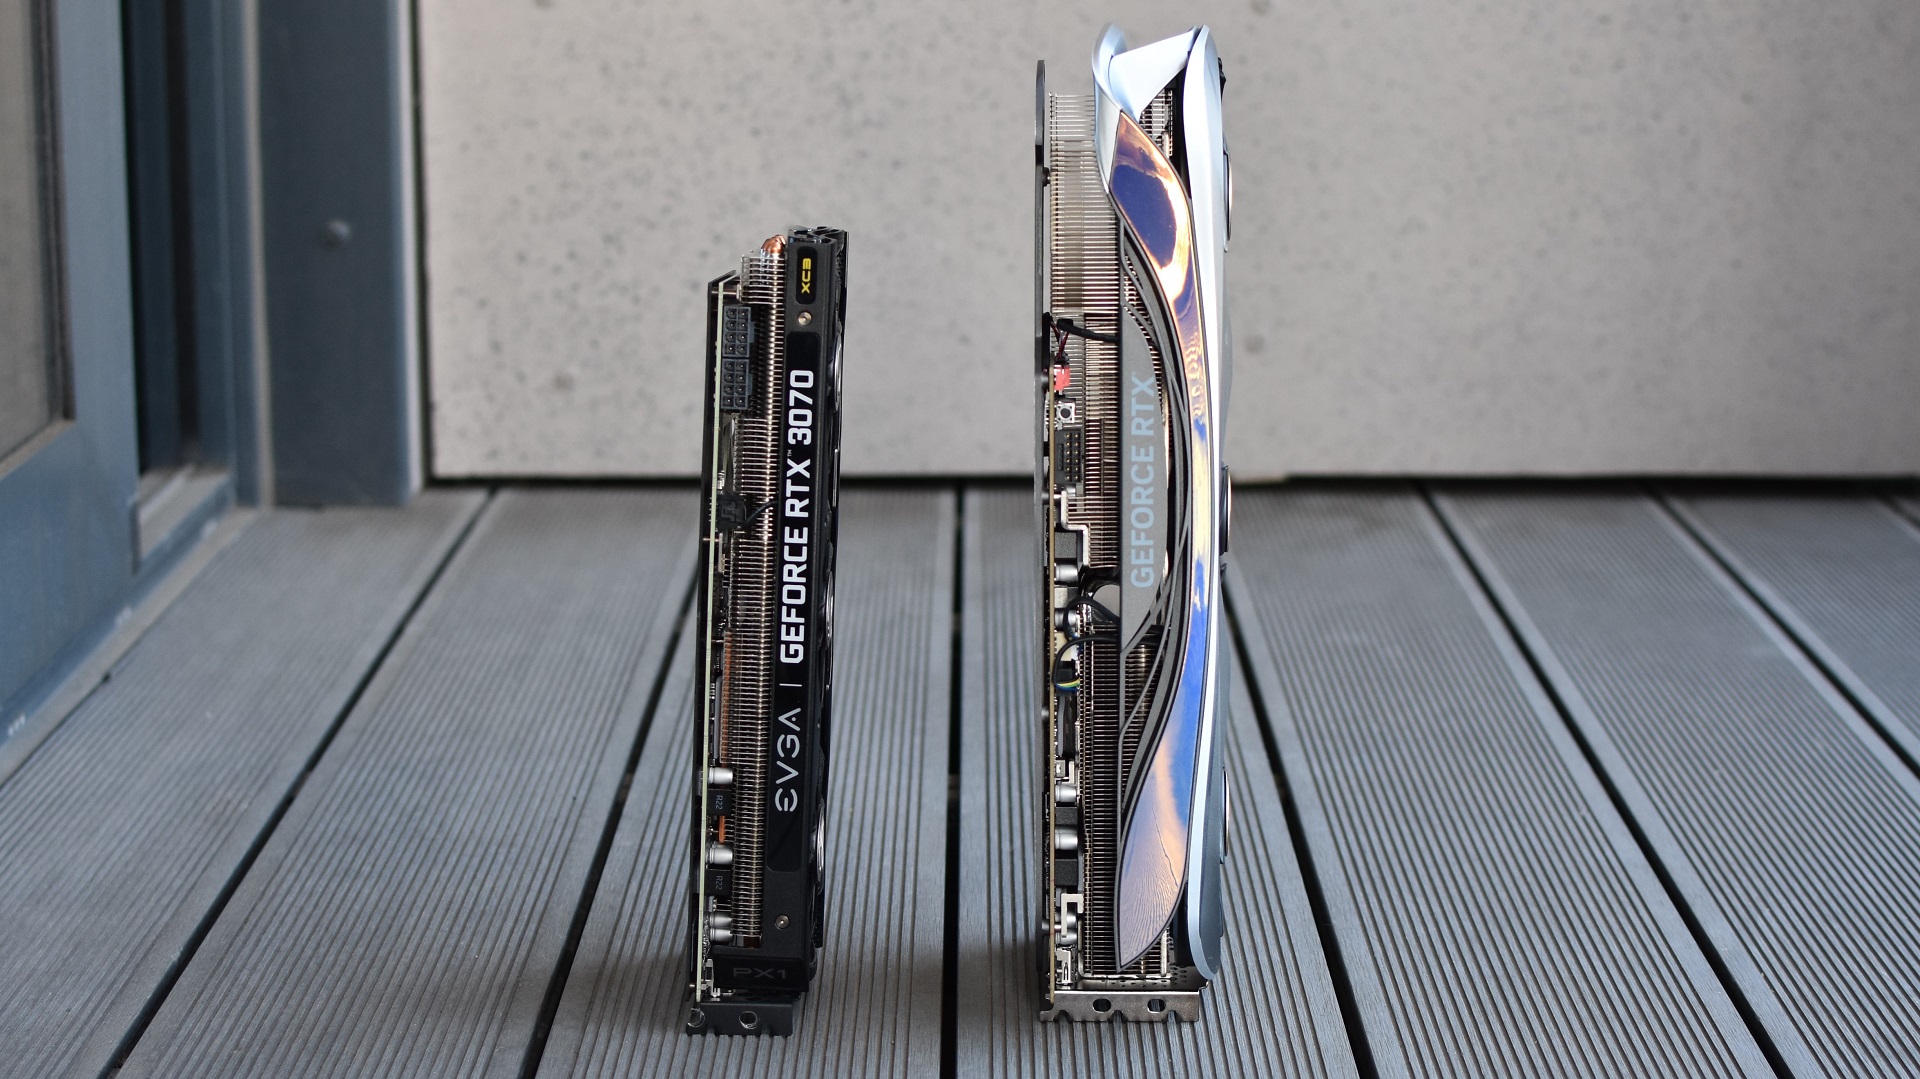 The Zotac Gaming GeForce RTX 4090 Amp Extreme Airo stood upright next to am RTX 3070, showing the size difference.